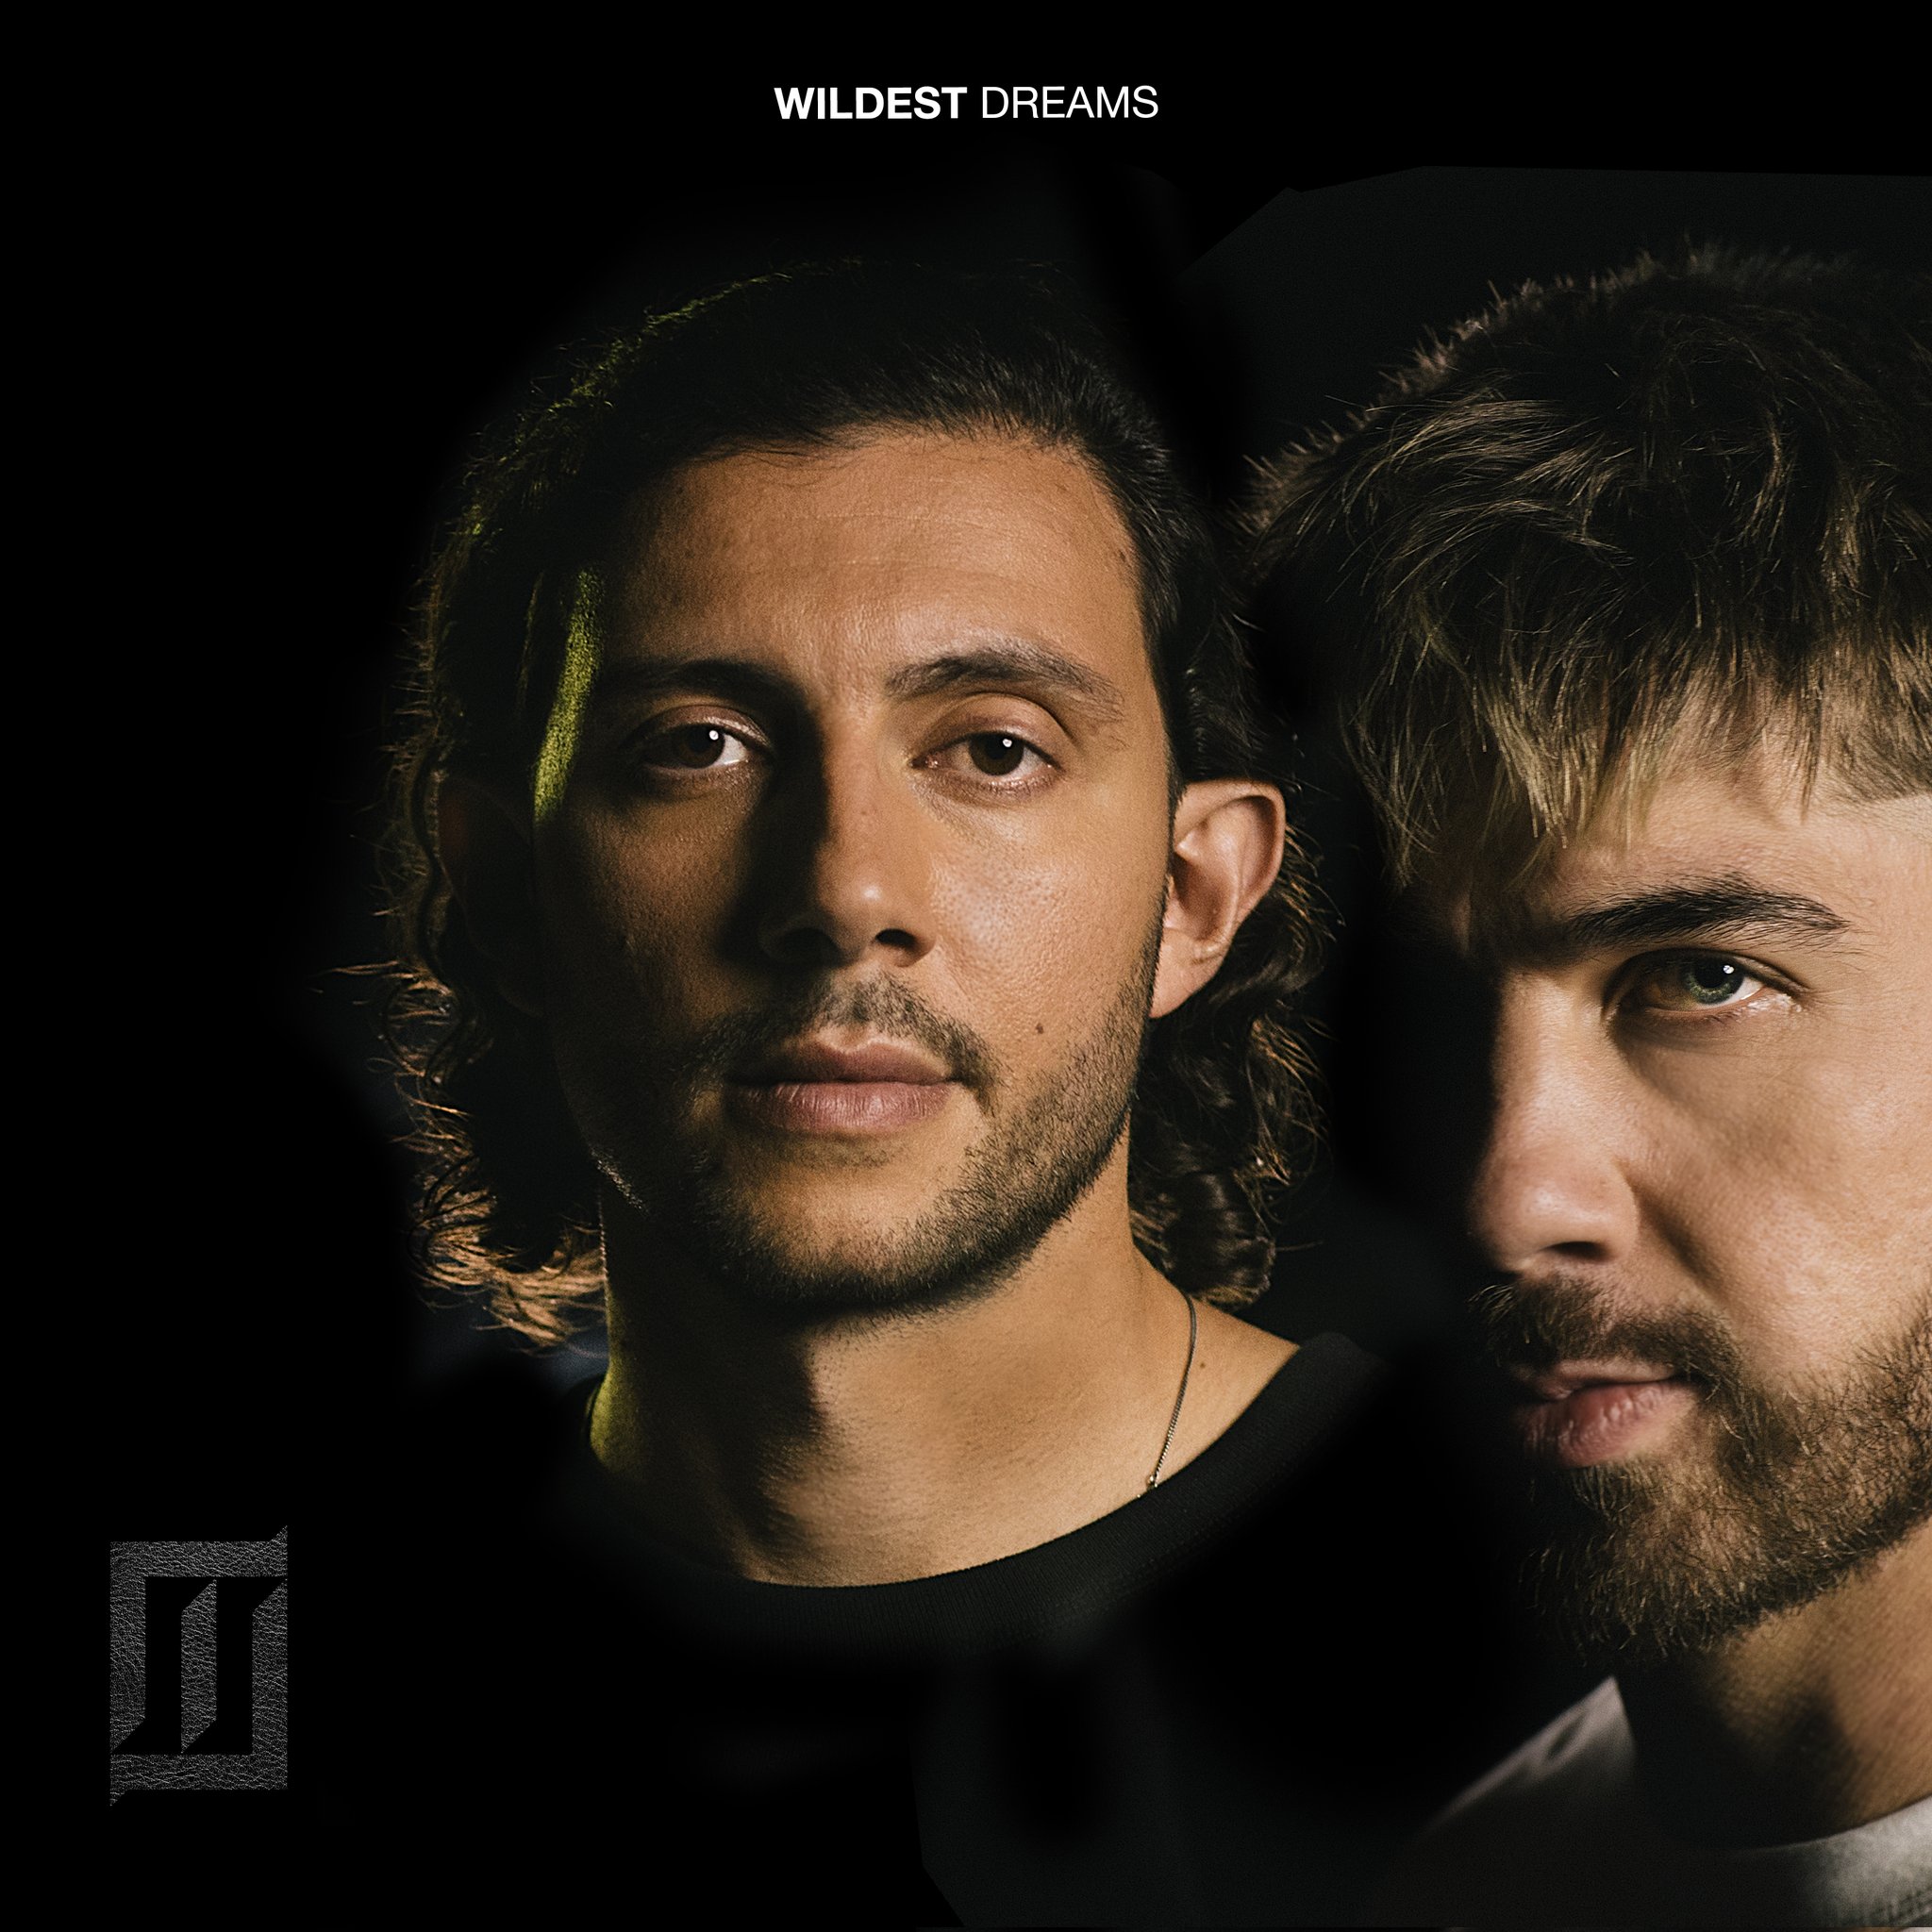 Majid Jordan Drops “Forget About The Party” Ahead Of “Wildest Dreams” Album Release